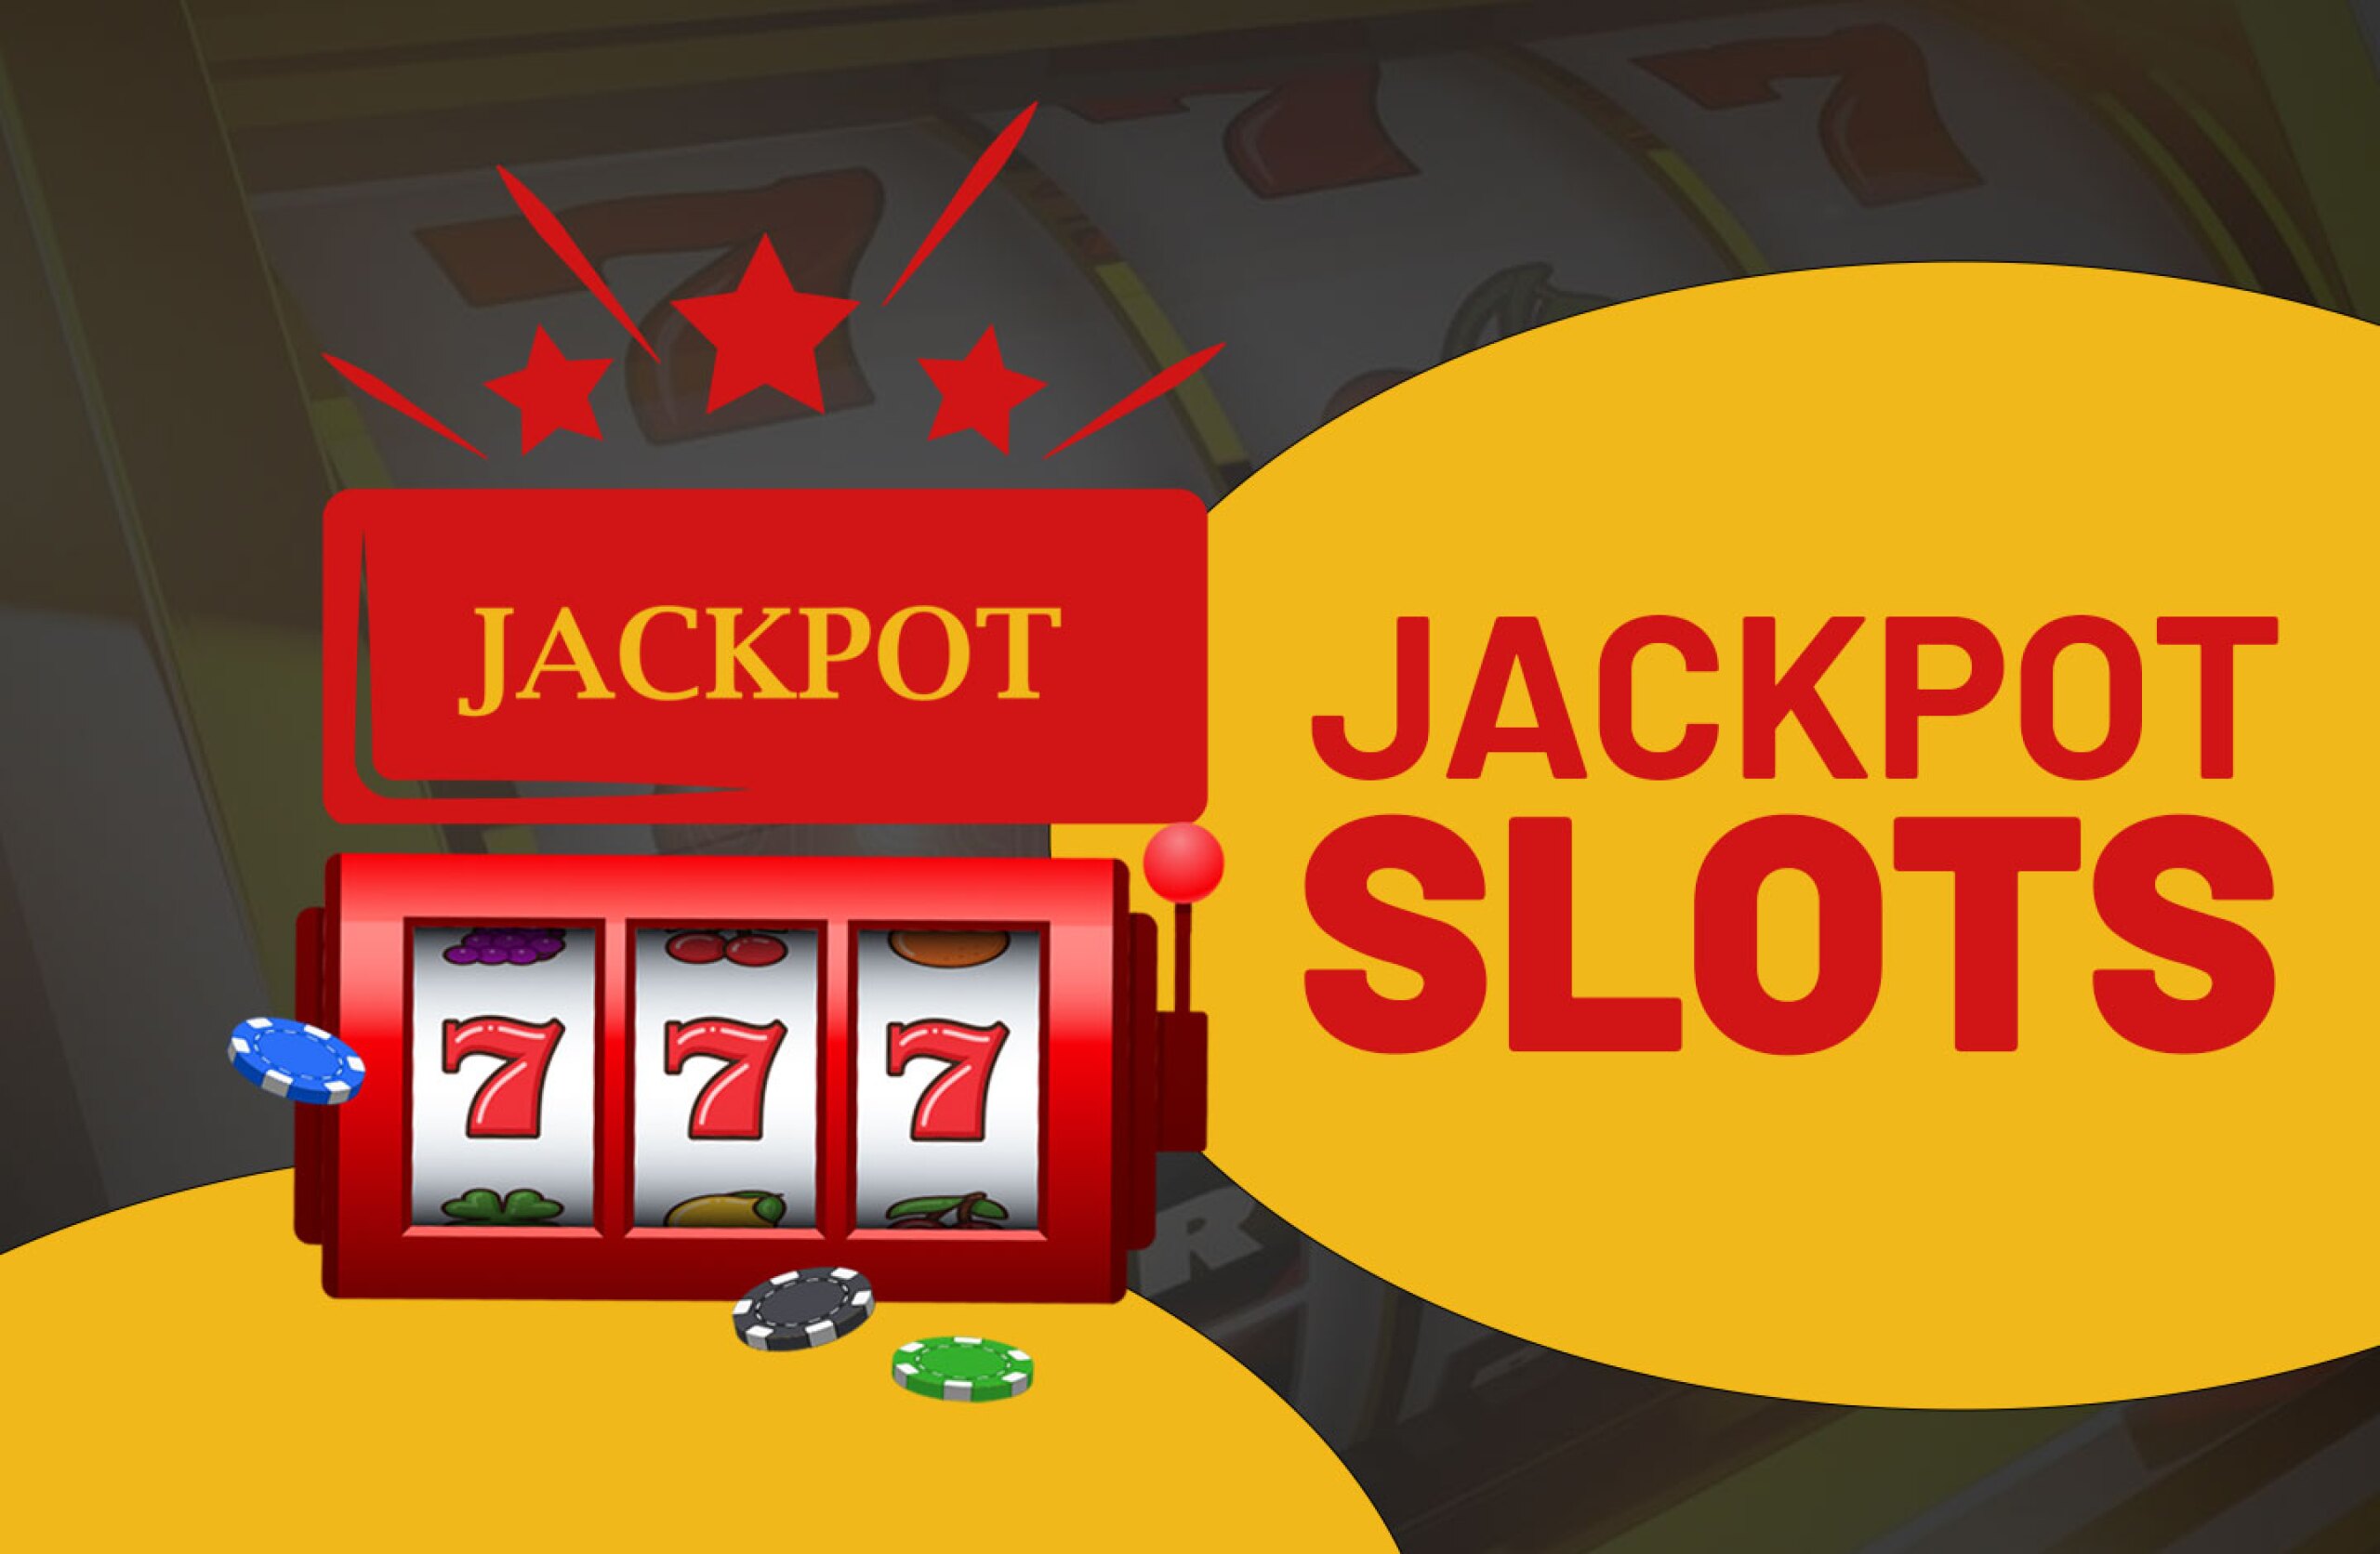 Best Jackpot Slots in 2023: Top 8 Progressive Jackpot Slot Sites Ranked by Payouts & Prize Pools